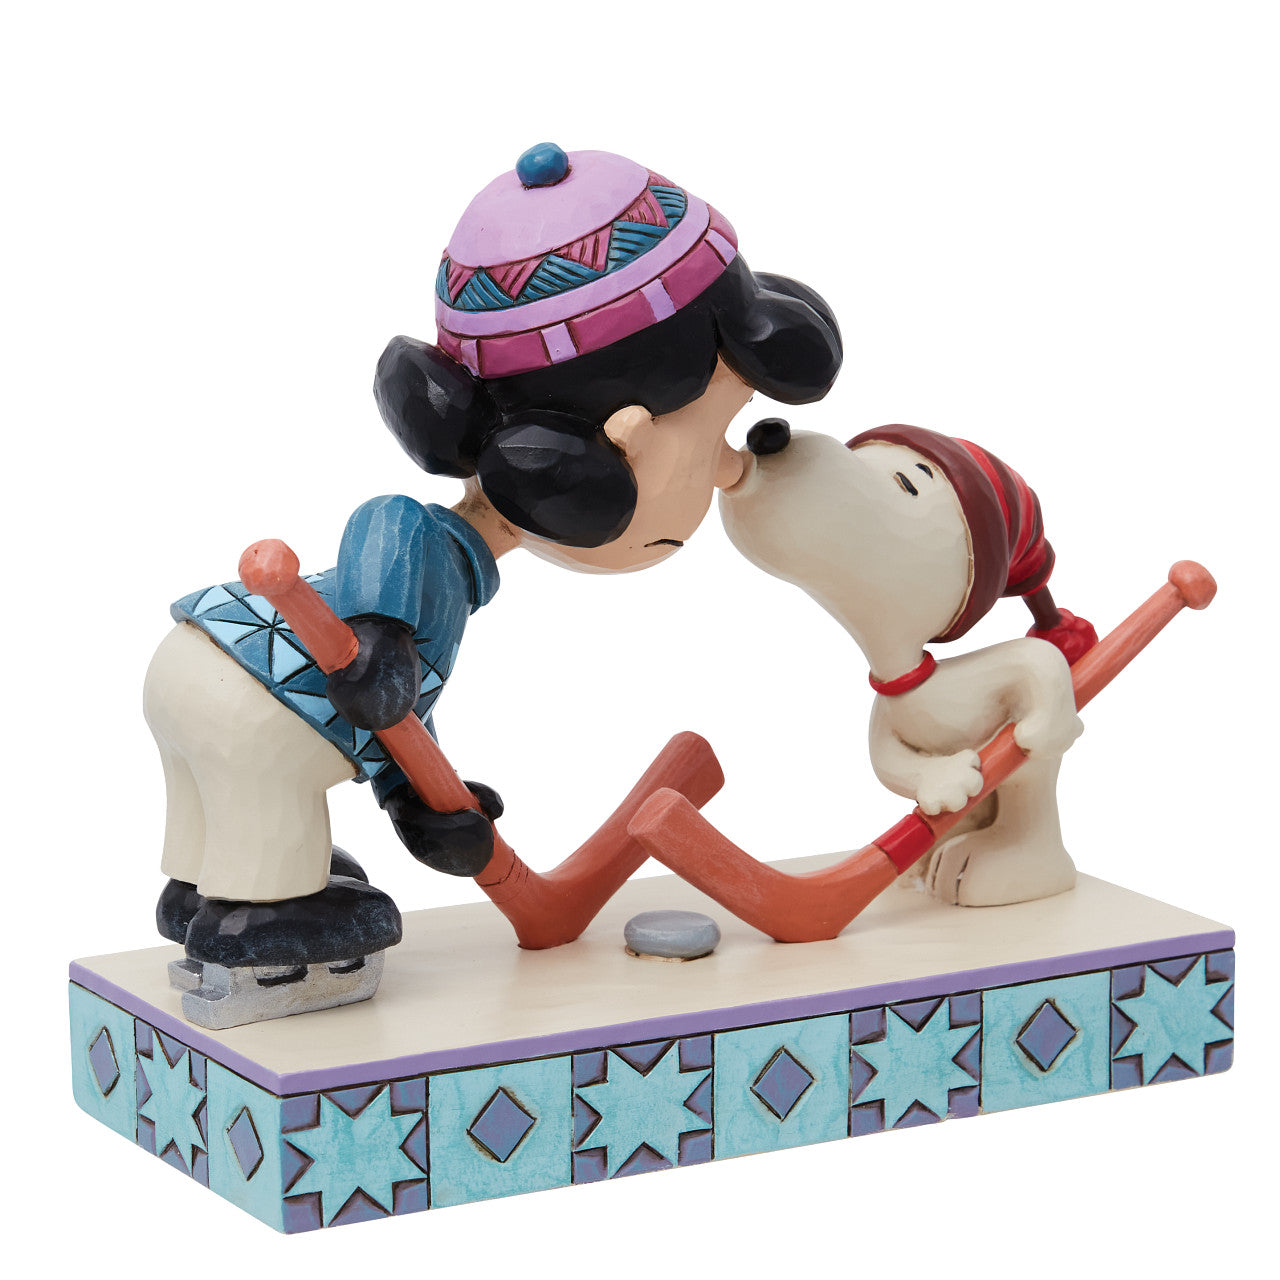 A Surprise Smootch (Snoopy & Lucy playing Hockey)